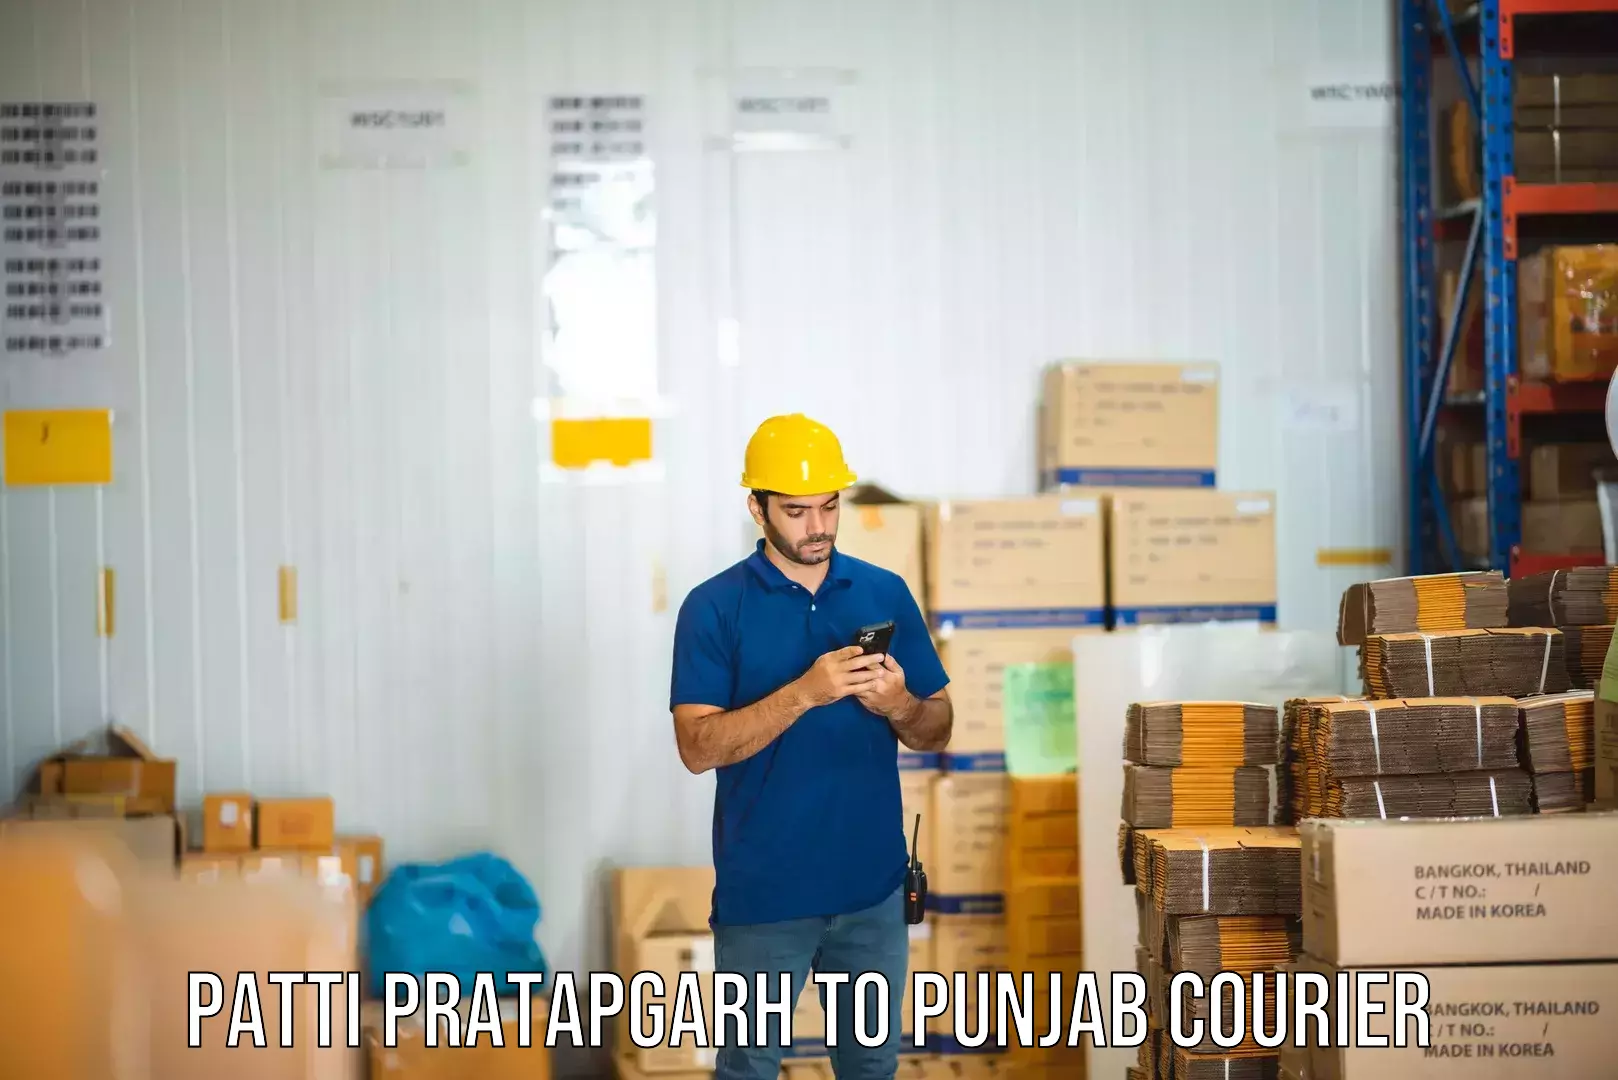 Cost-effective courier solutions Patti Pratapgarh to Dharamkot